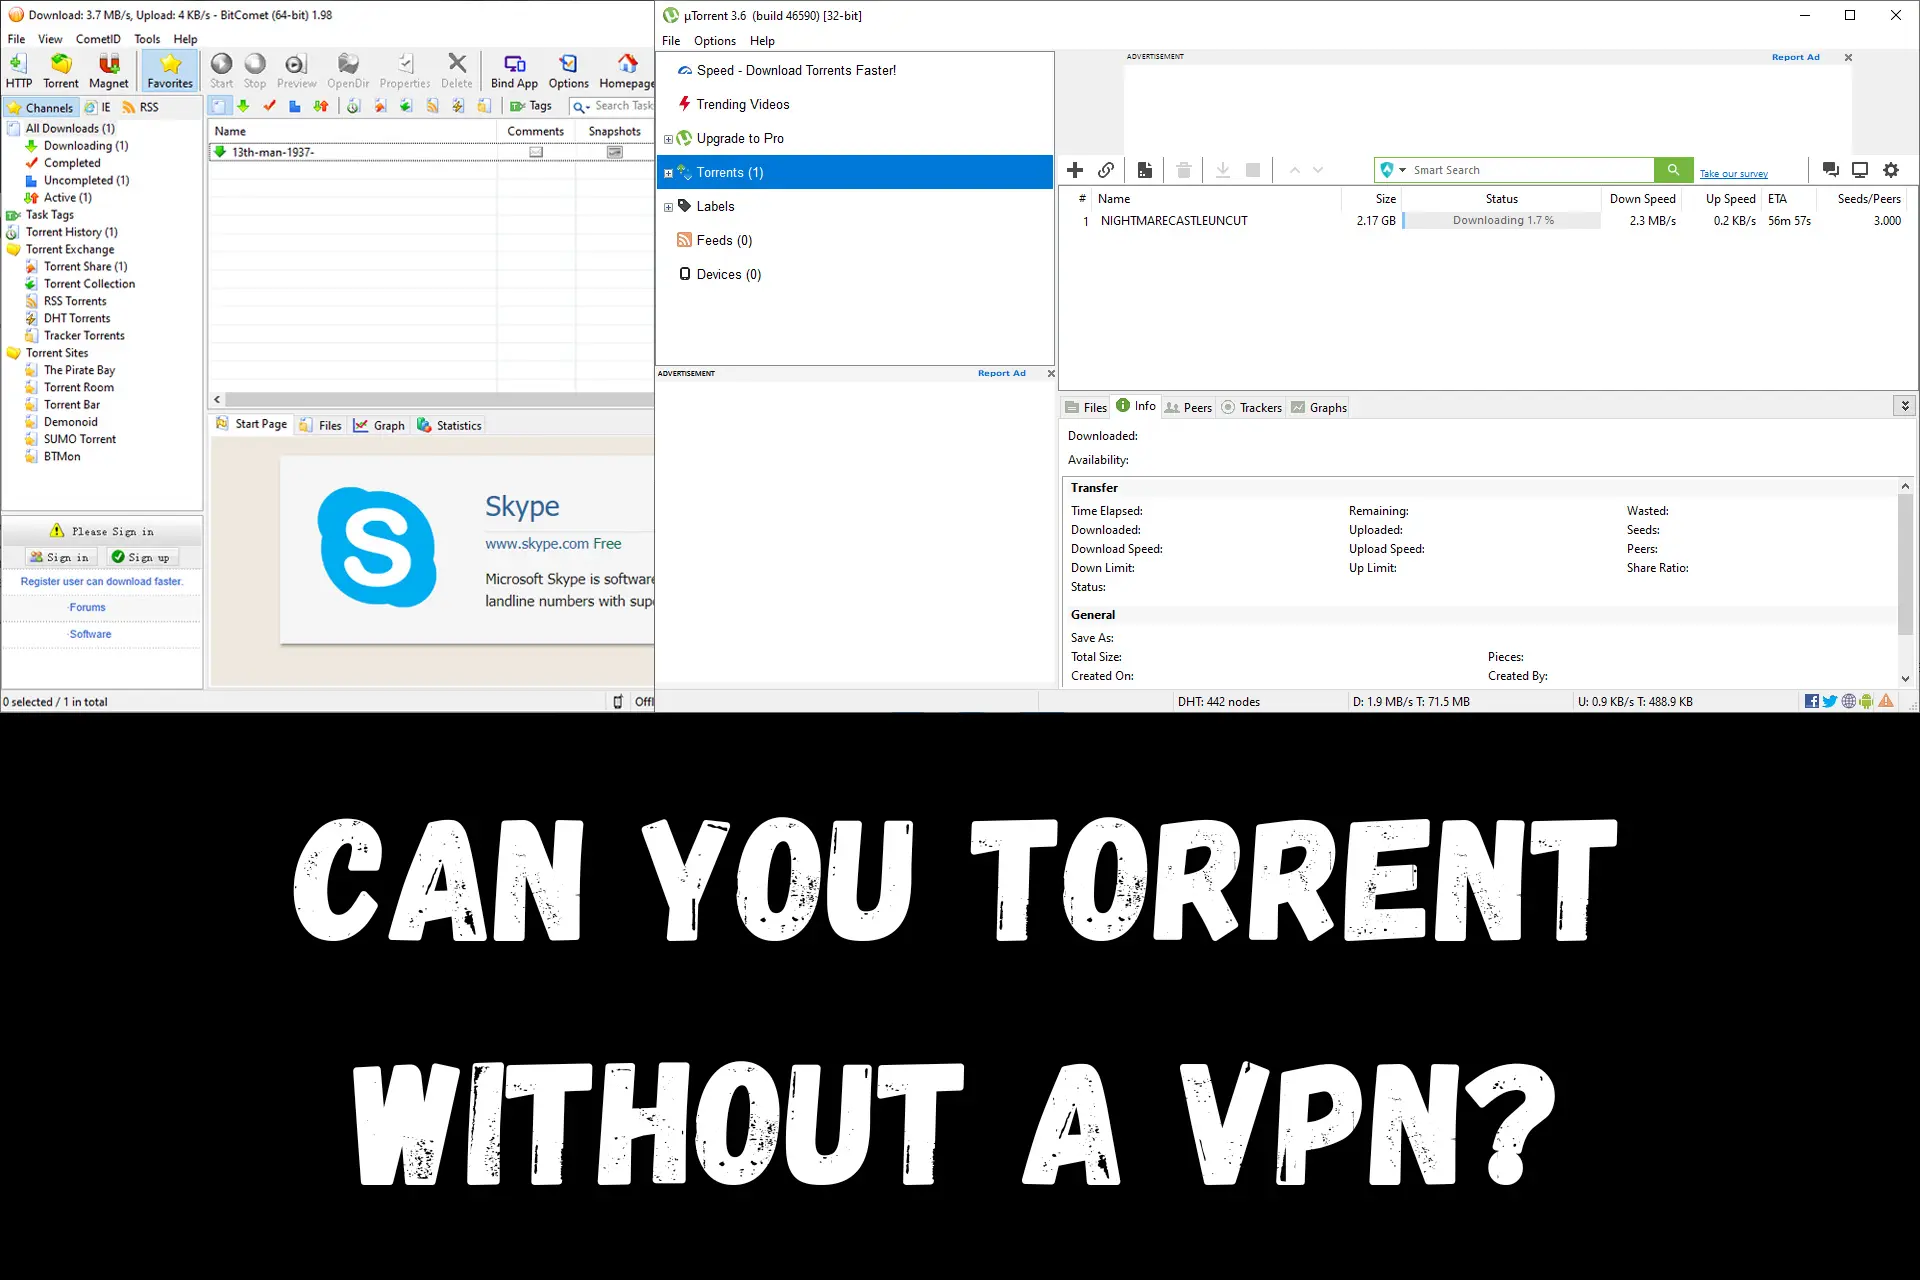 Can you torrent without a VPN